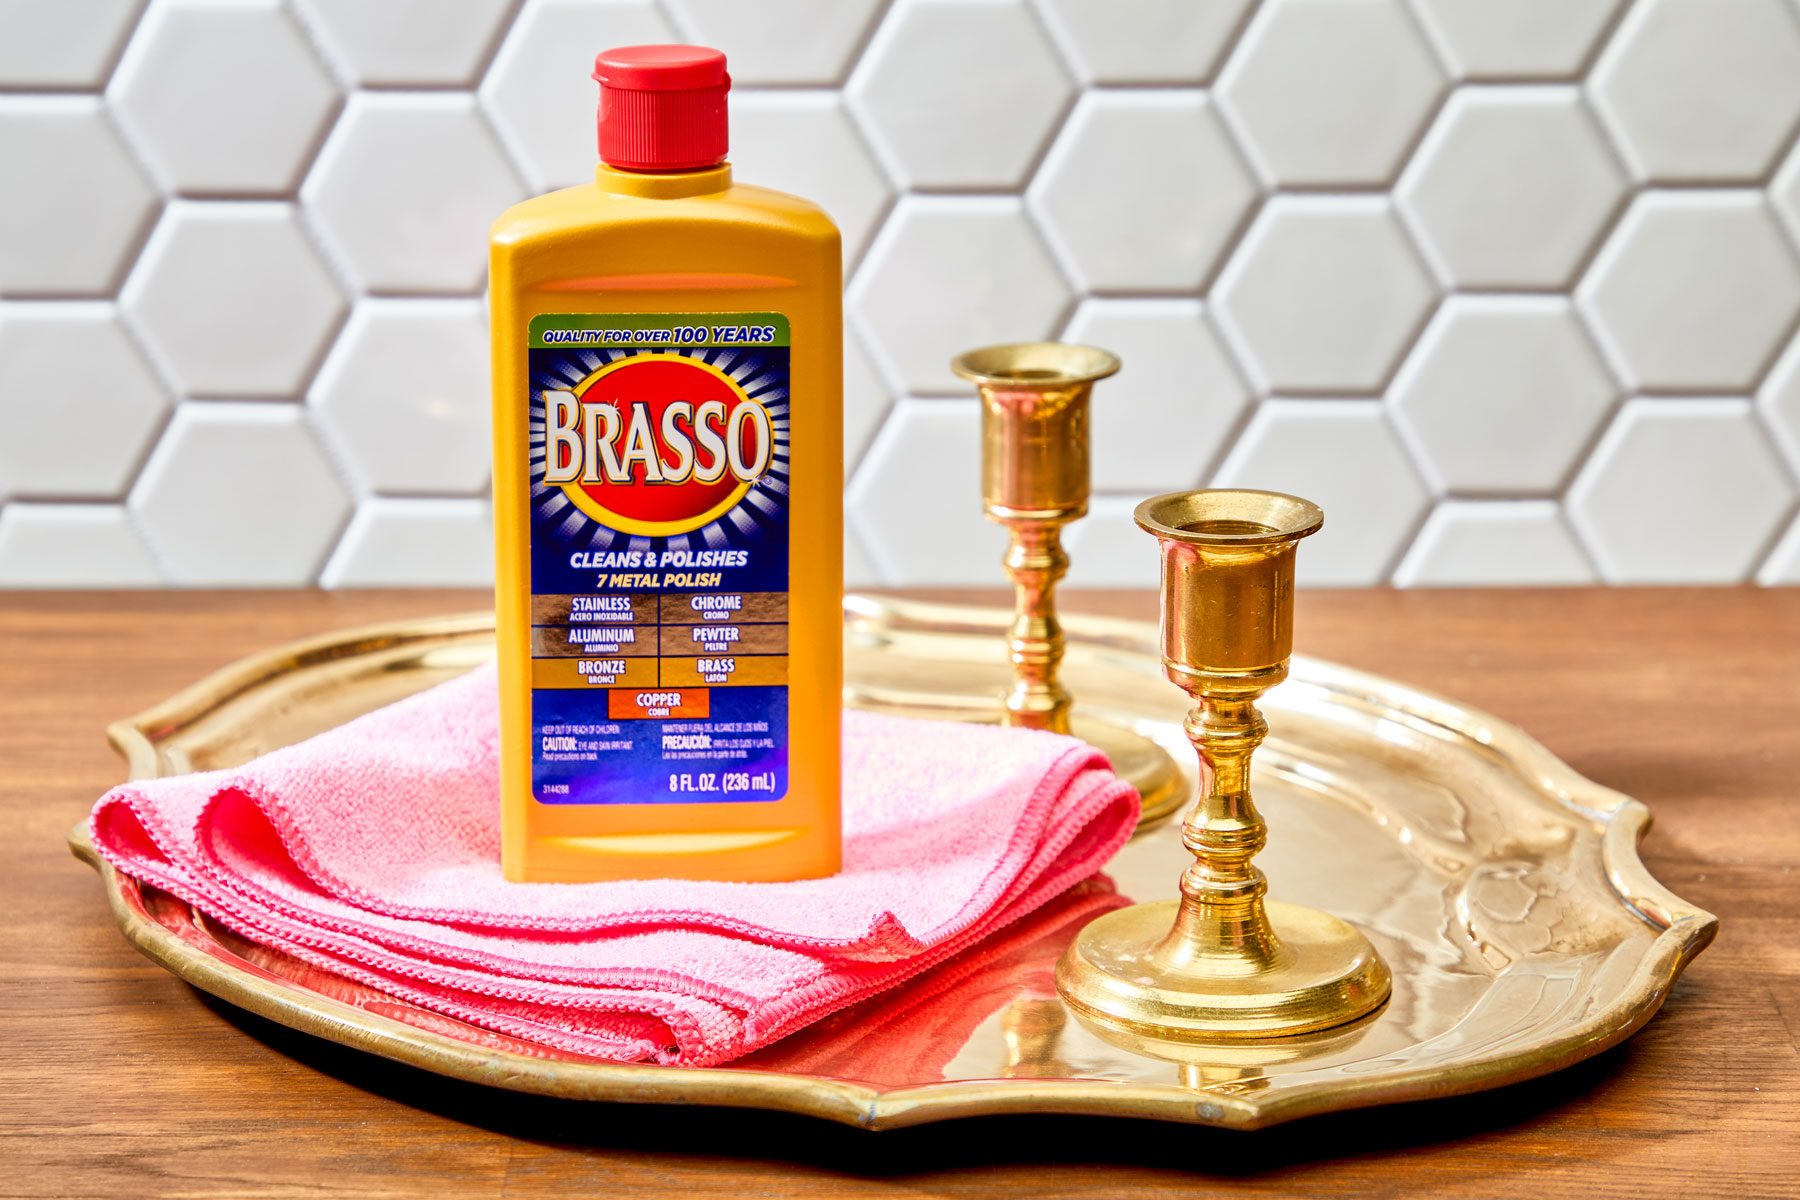 How to Clean Brass - 5+ Ways to Clean Tarnished Brass with Vinegar